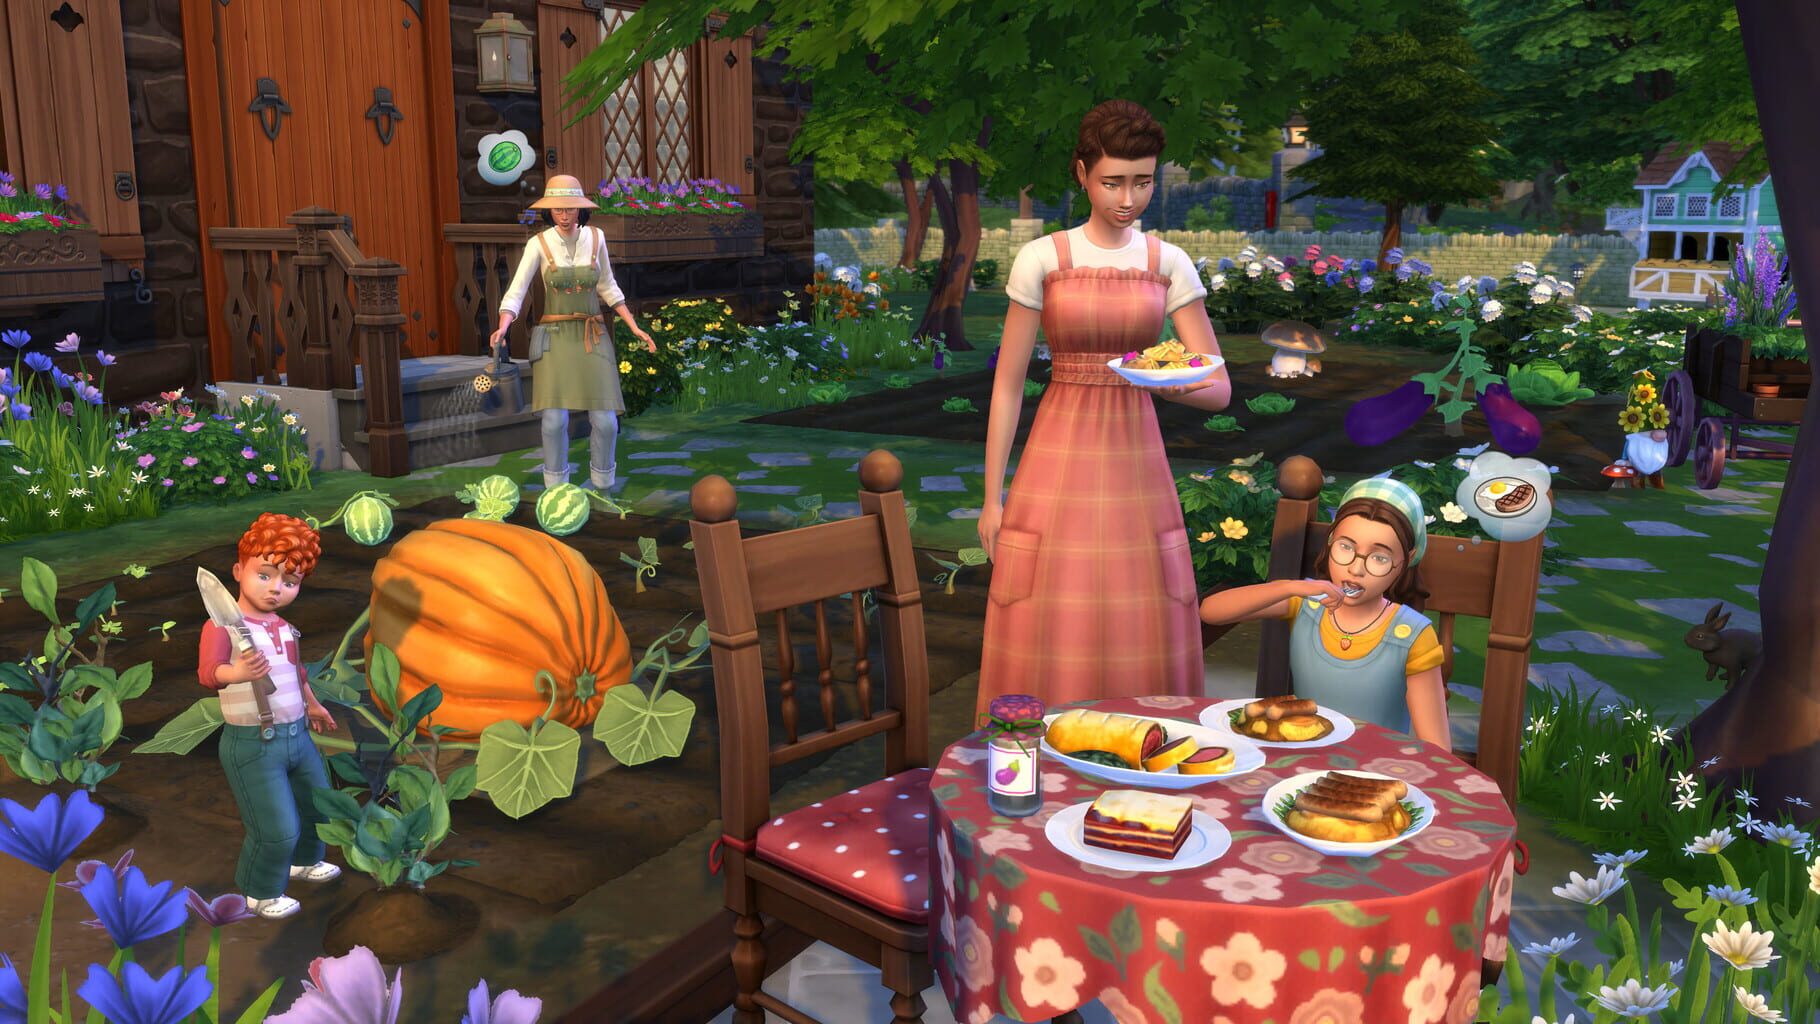 The Sims 4: Cottage Living Image